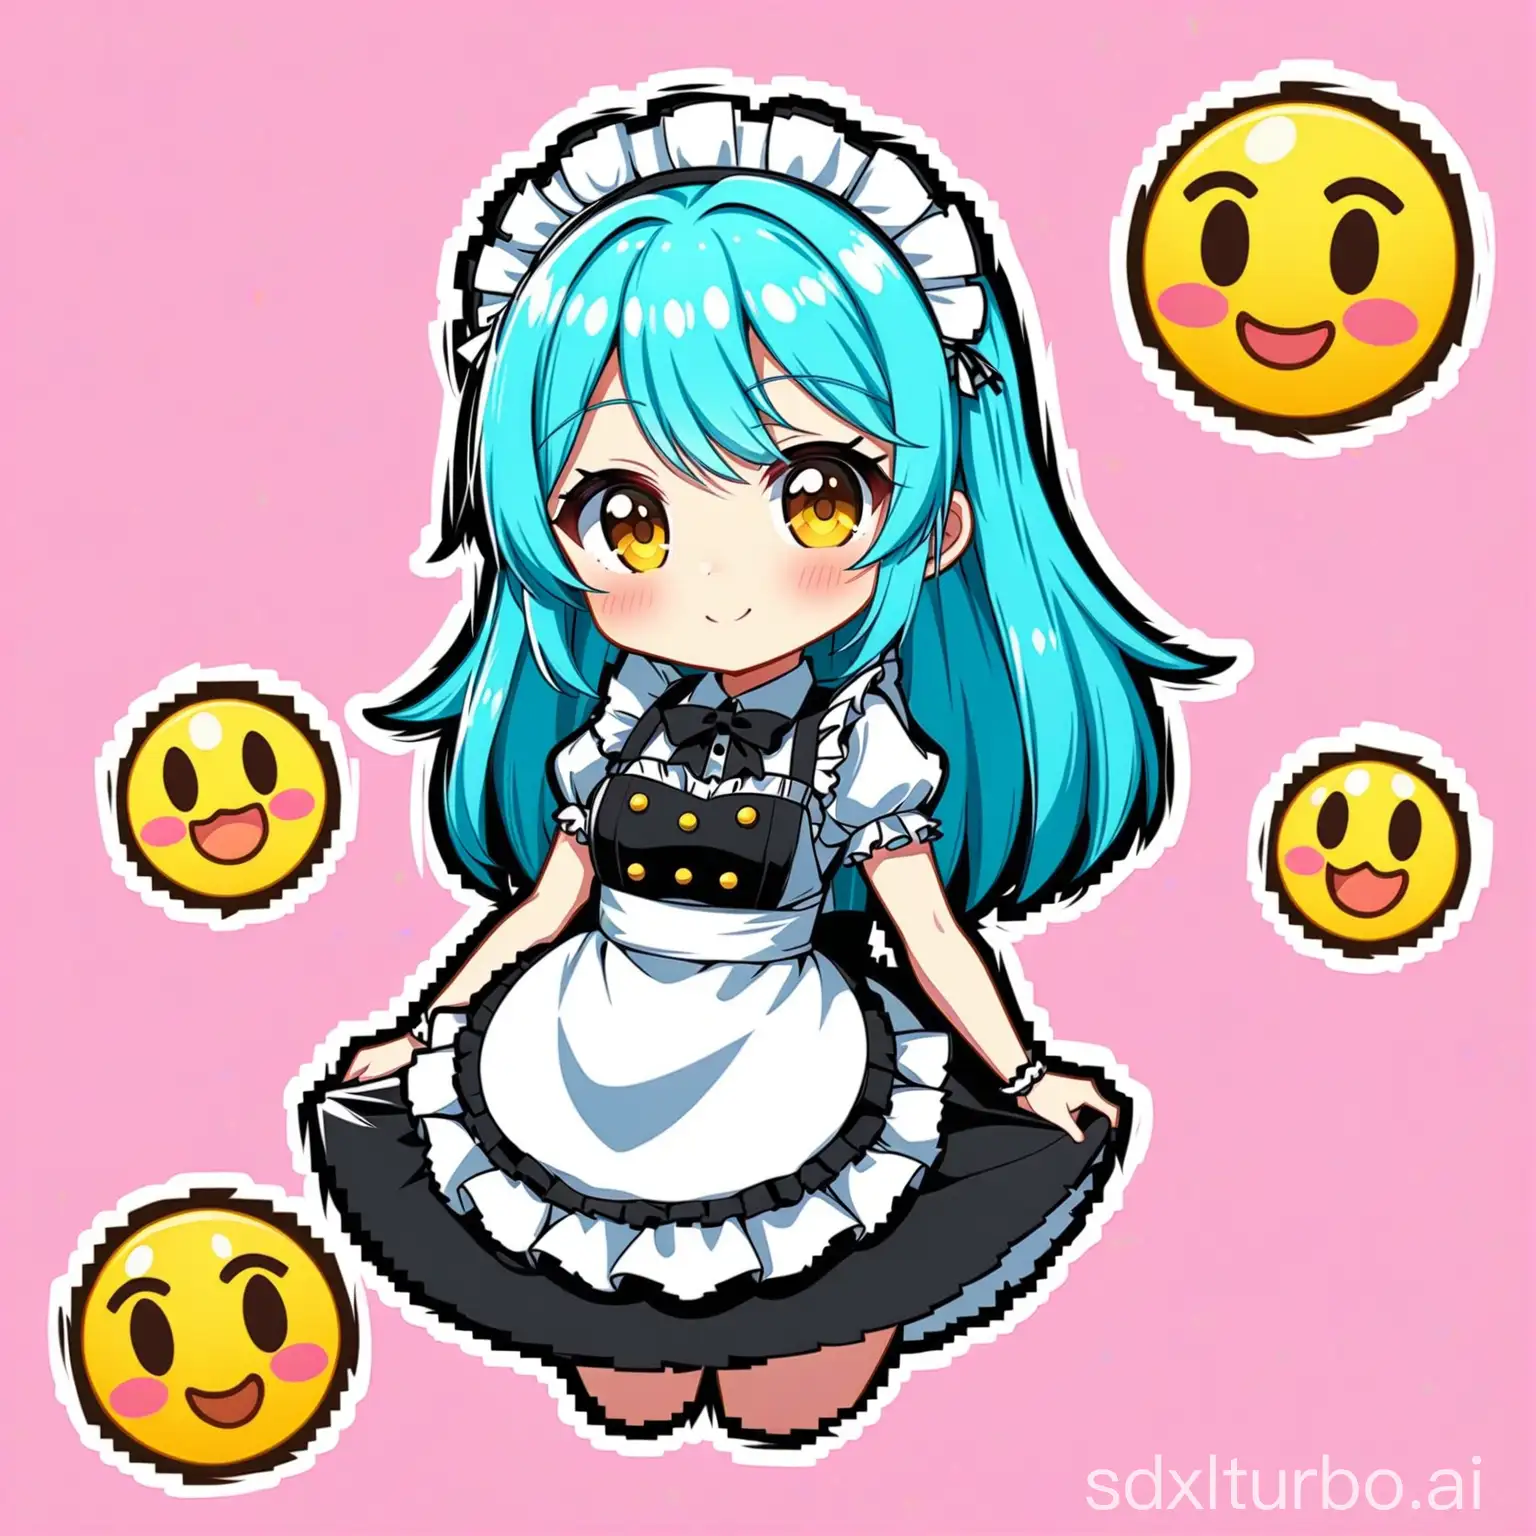 Anime-Maid-Stickers-Cute-and-Sexy-Maid-Outfit-Emojis